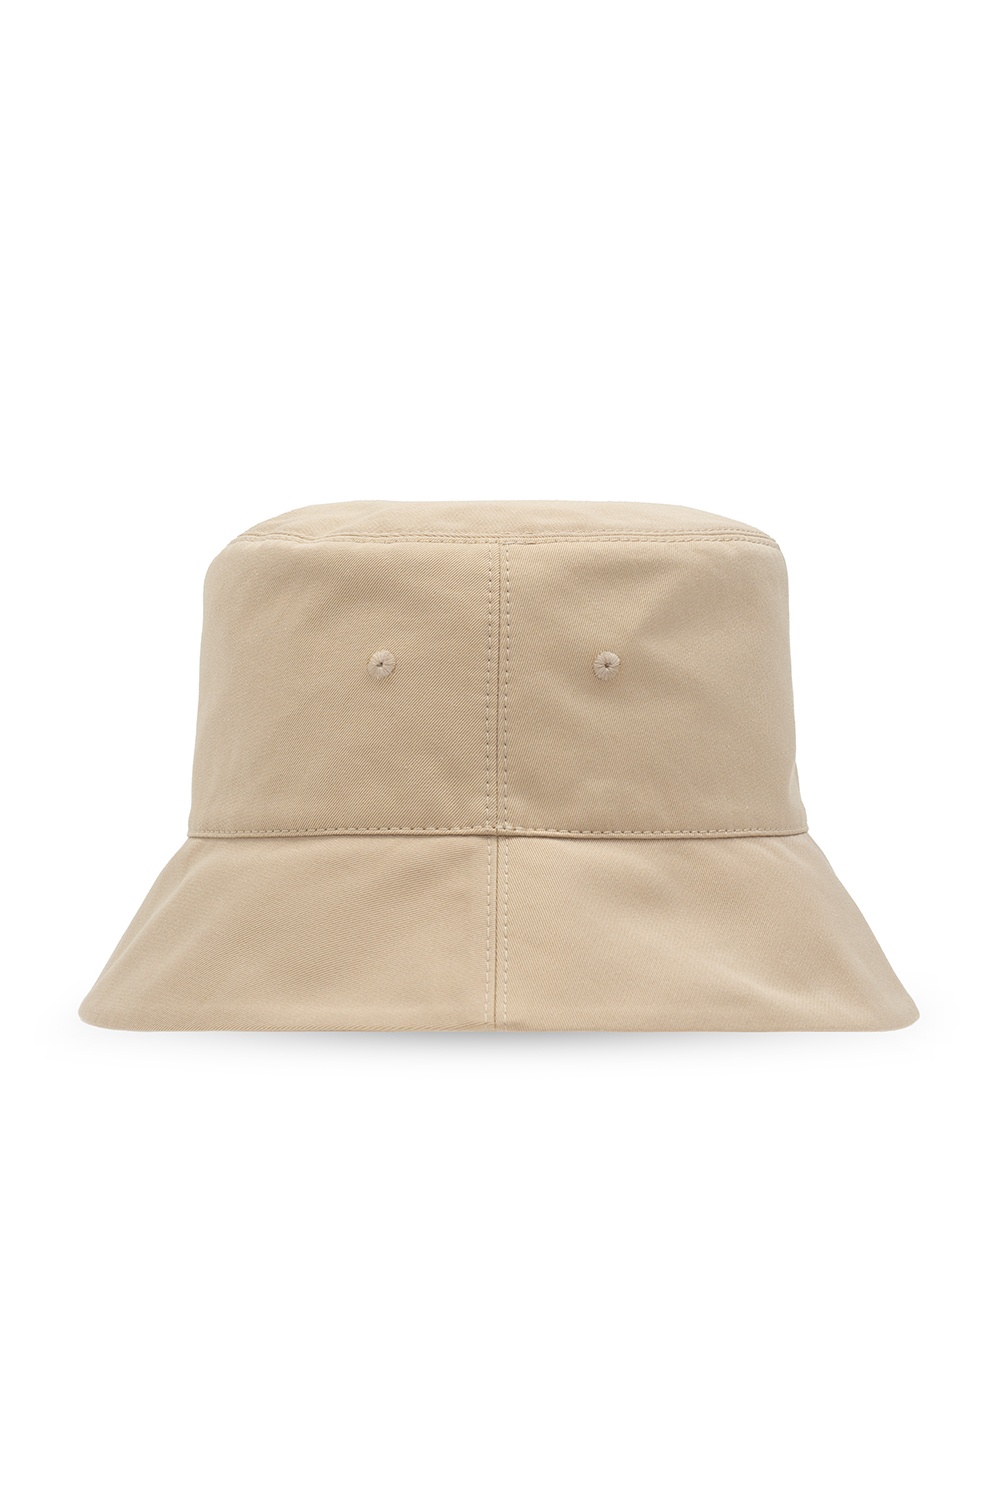 Burberry hat xs white footwear Shorts